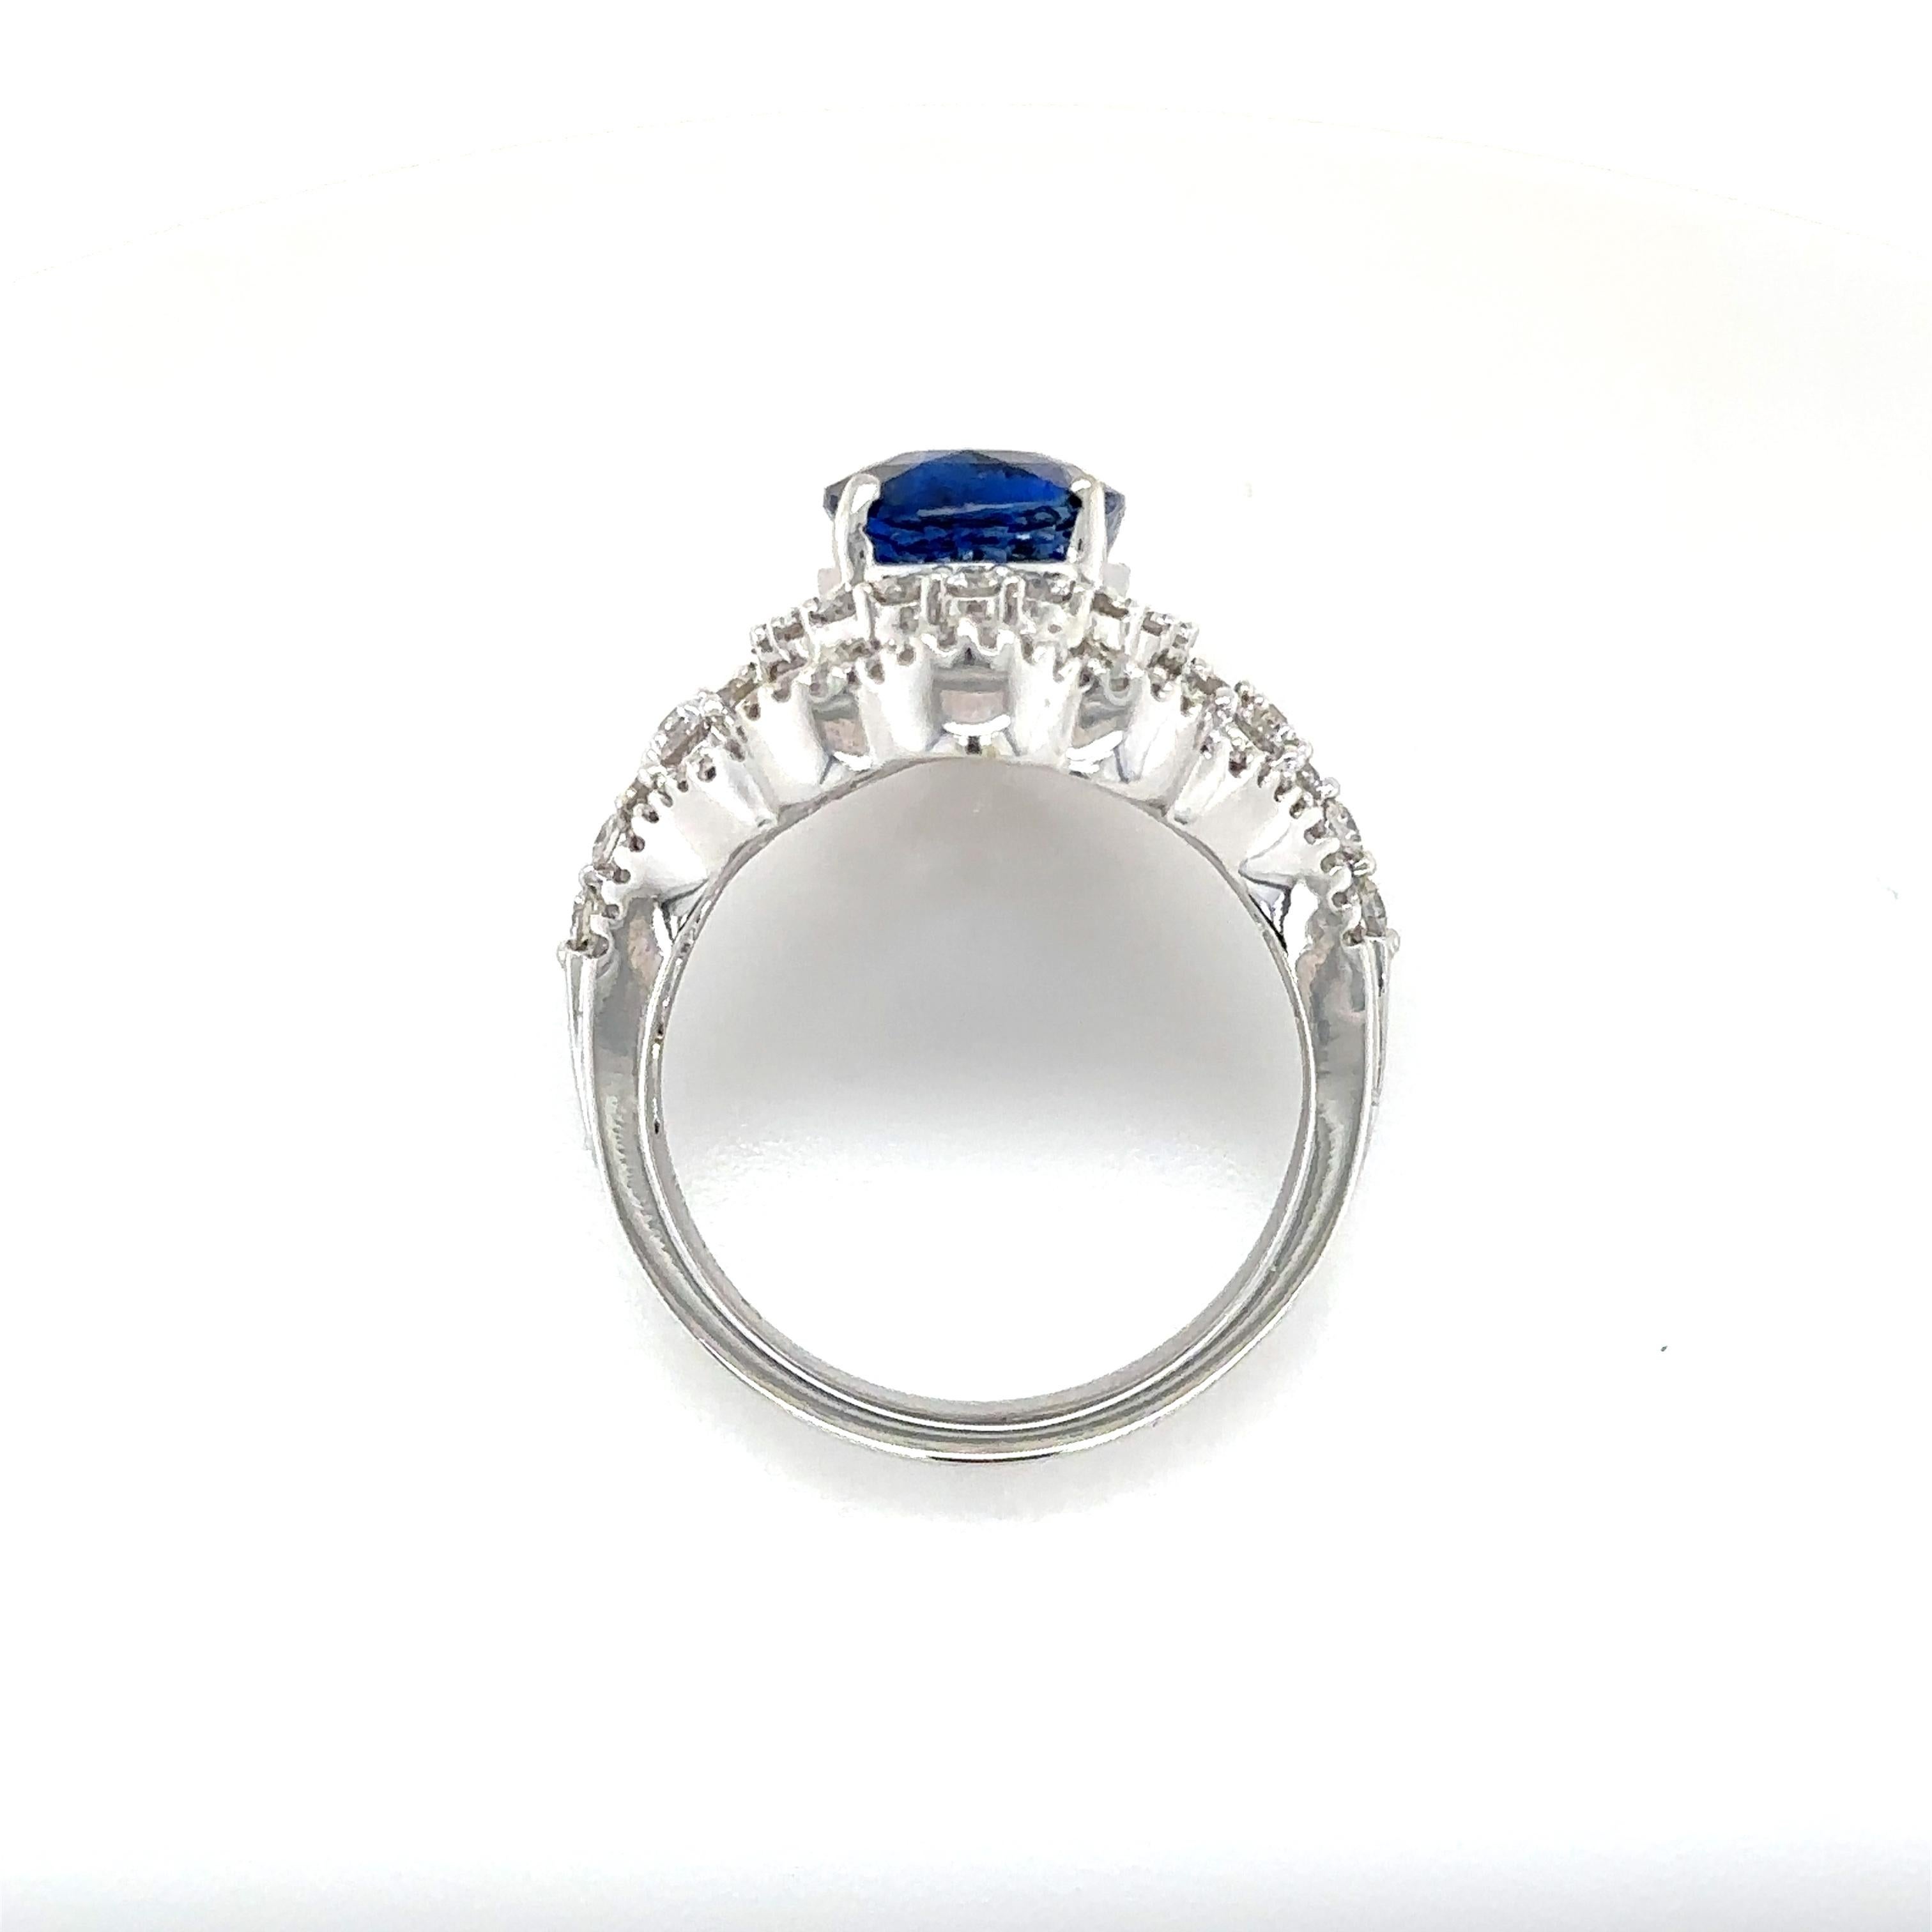 This bespoke ring is a true work of art, crafted from the finest workmanship to create a breathtakingly beautiful piece of jewelry that is both unique and elegant. Made from 18k white gold, this ring features a rare and exquisite 3.62ct. oval-cut